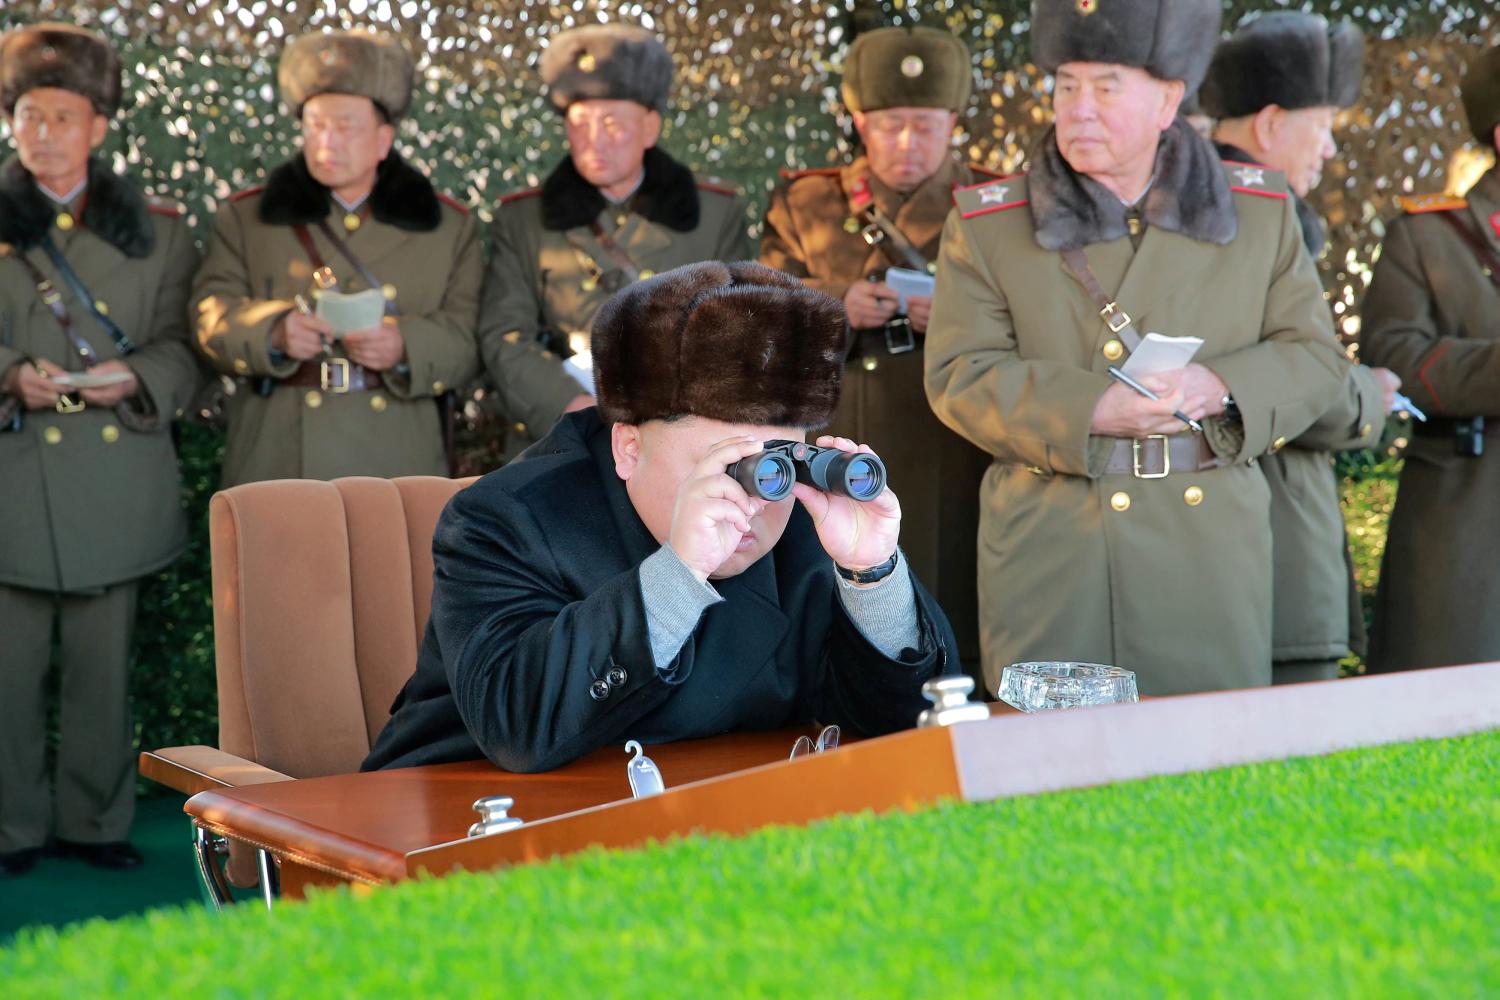 North Korean leader Kim Jong Un guides a firing contest among multiple launch rocket system (MLRS) batteries selected from large combined units of the KPA, in this undated photo released by North Korea's Korean Central News Agency (KCNA) in Pyongyang on December 21, 2016. KCNA/via Reuters ATTENTION EDITORS - THIS PICTURE WAS PROVIDED BY A THIRD PARTY. REUTERS IS UNABLE TO INDEPENDENTLY VERIFY THE AUTHENTICITY, CONTENT, LOCATION OR DATE OF THIS IMAGE. FOR EDITORIAL USE ONLY. NO THIRD PARTY SALES. SOUTH KOREA OUT. THIS PICTURE IS DISTRIBUTED EXACTLY AS RECEIVED BY REUTERS, AS A SERVICE TO CLIENTS. TPX IMAGES OF THE DAY - RTX2VYJG